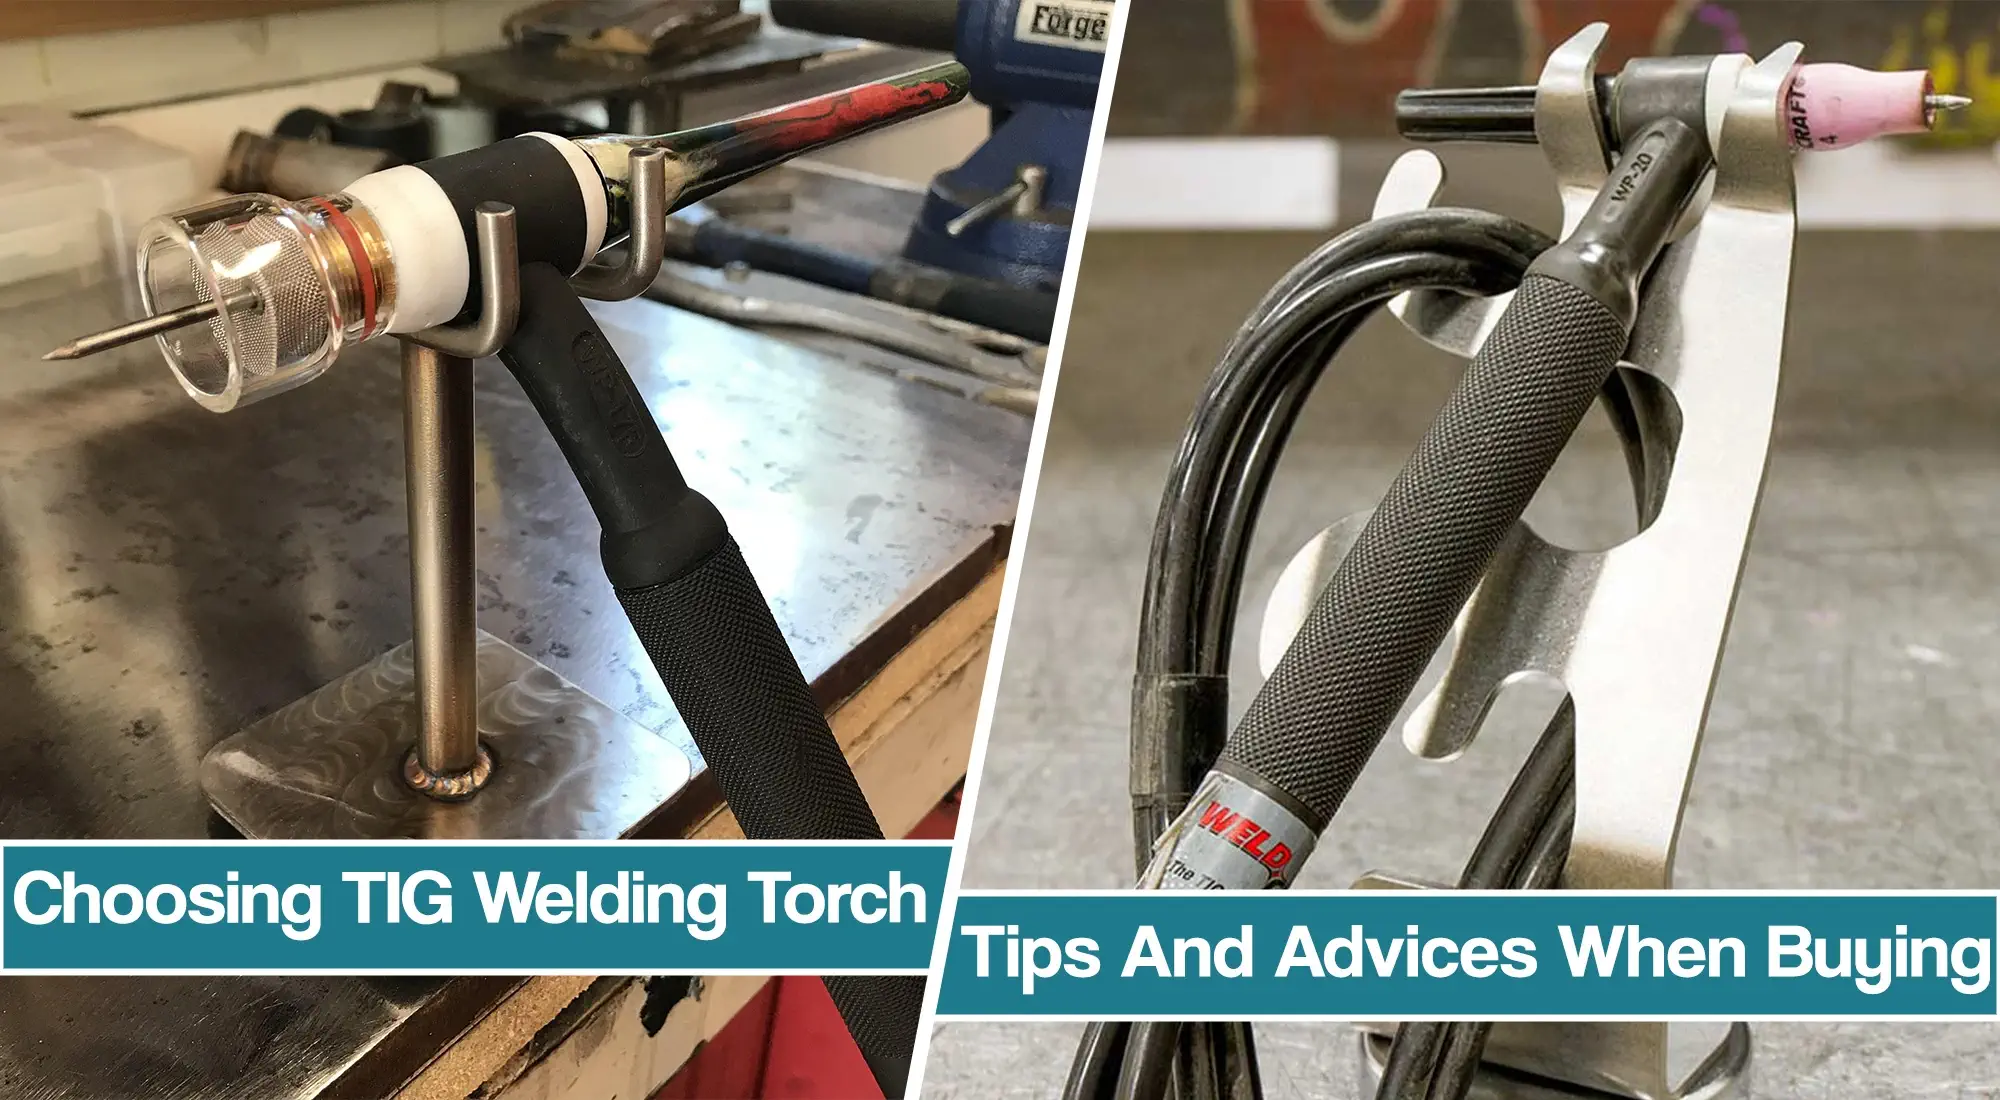 Tips On Choosing The Right TIG Torch